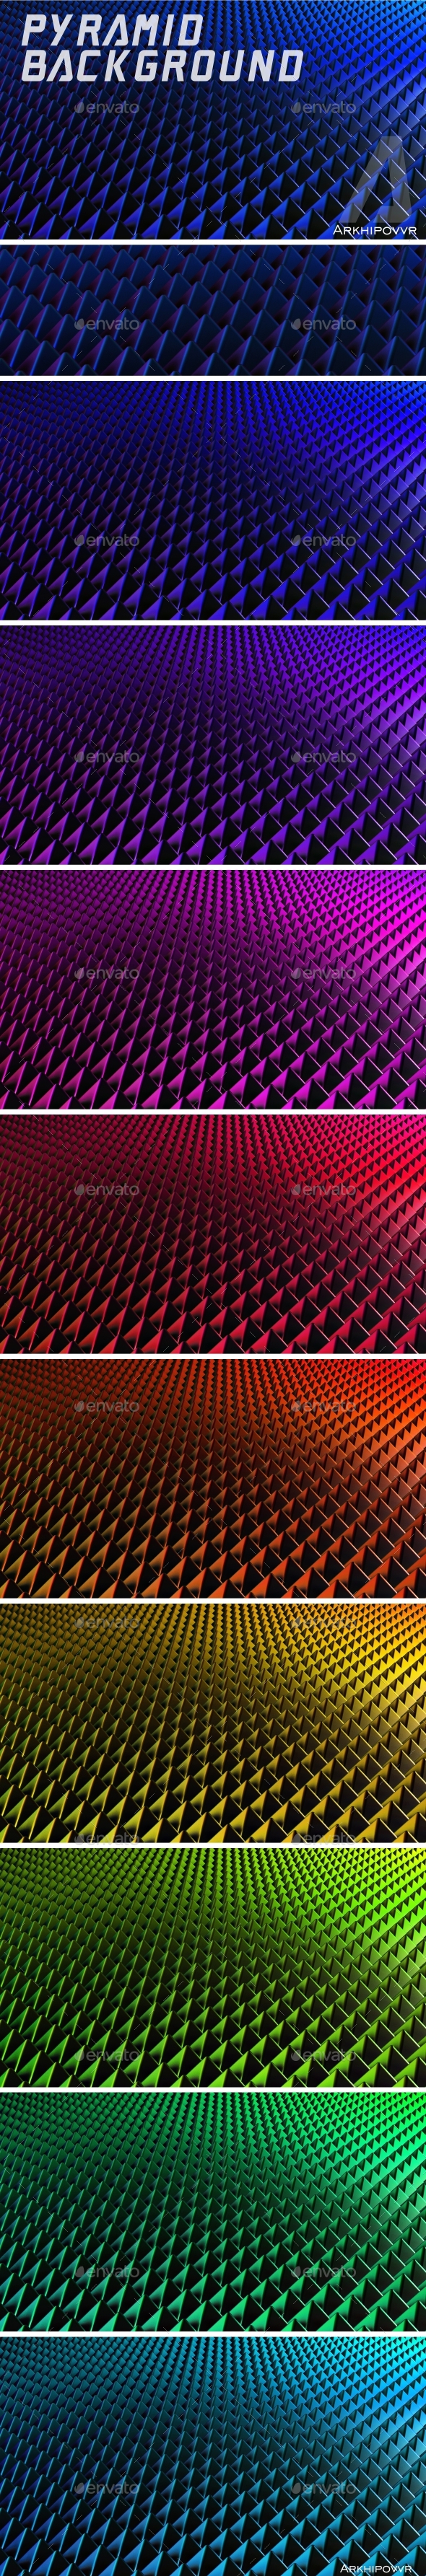 GraphicRiver Pyramid Backgrounds 21195766